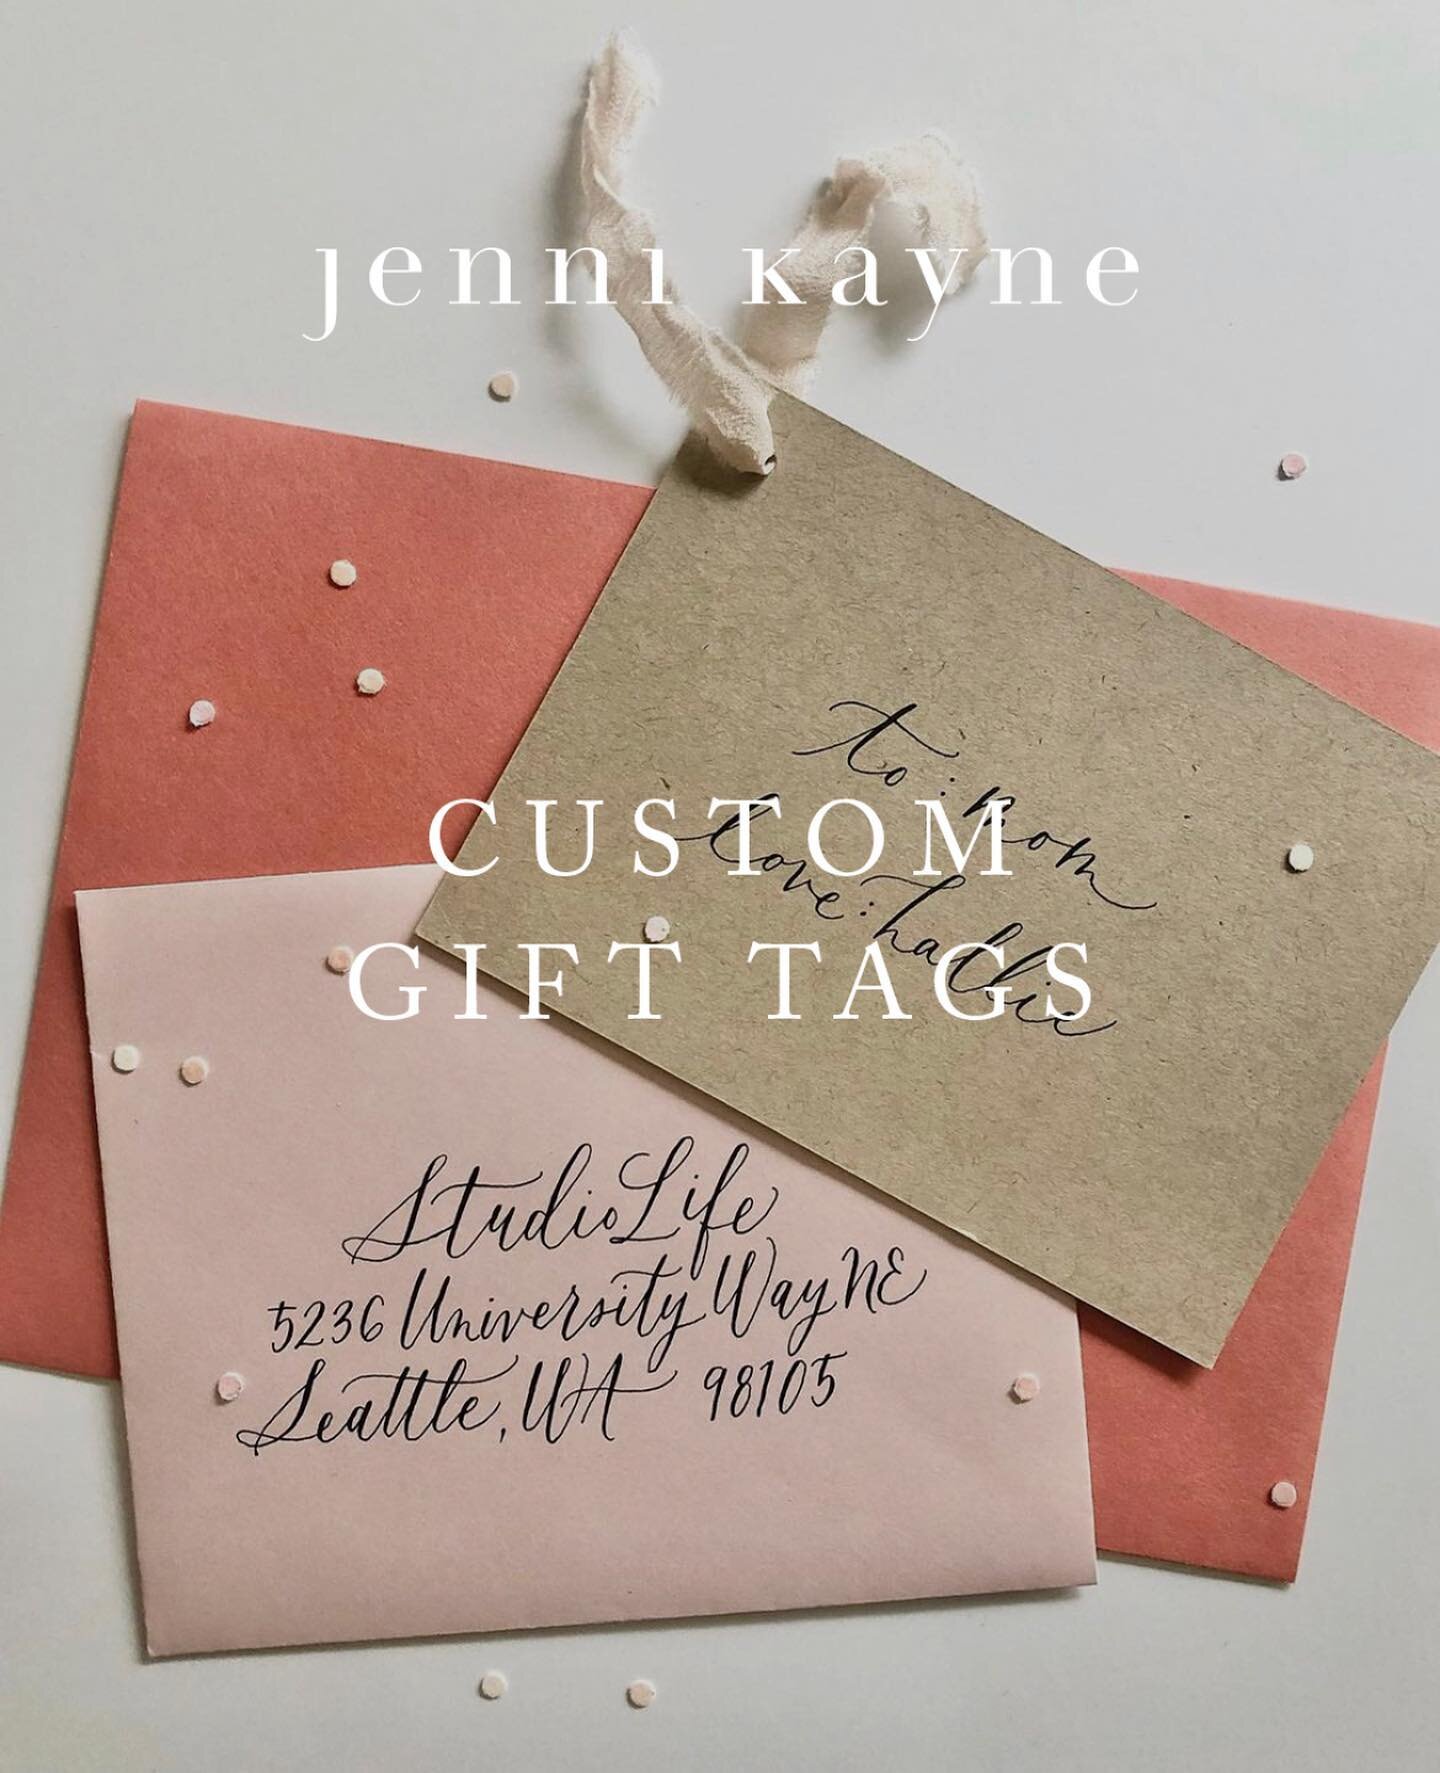 Join me at @jennikayne in @shopuvillage this Saturday, December 10th, for holiday shopping and complimentary custom gift tags from 11-2pm! Merry merry!